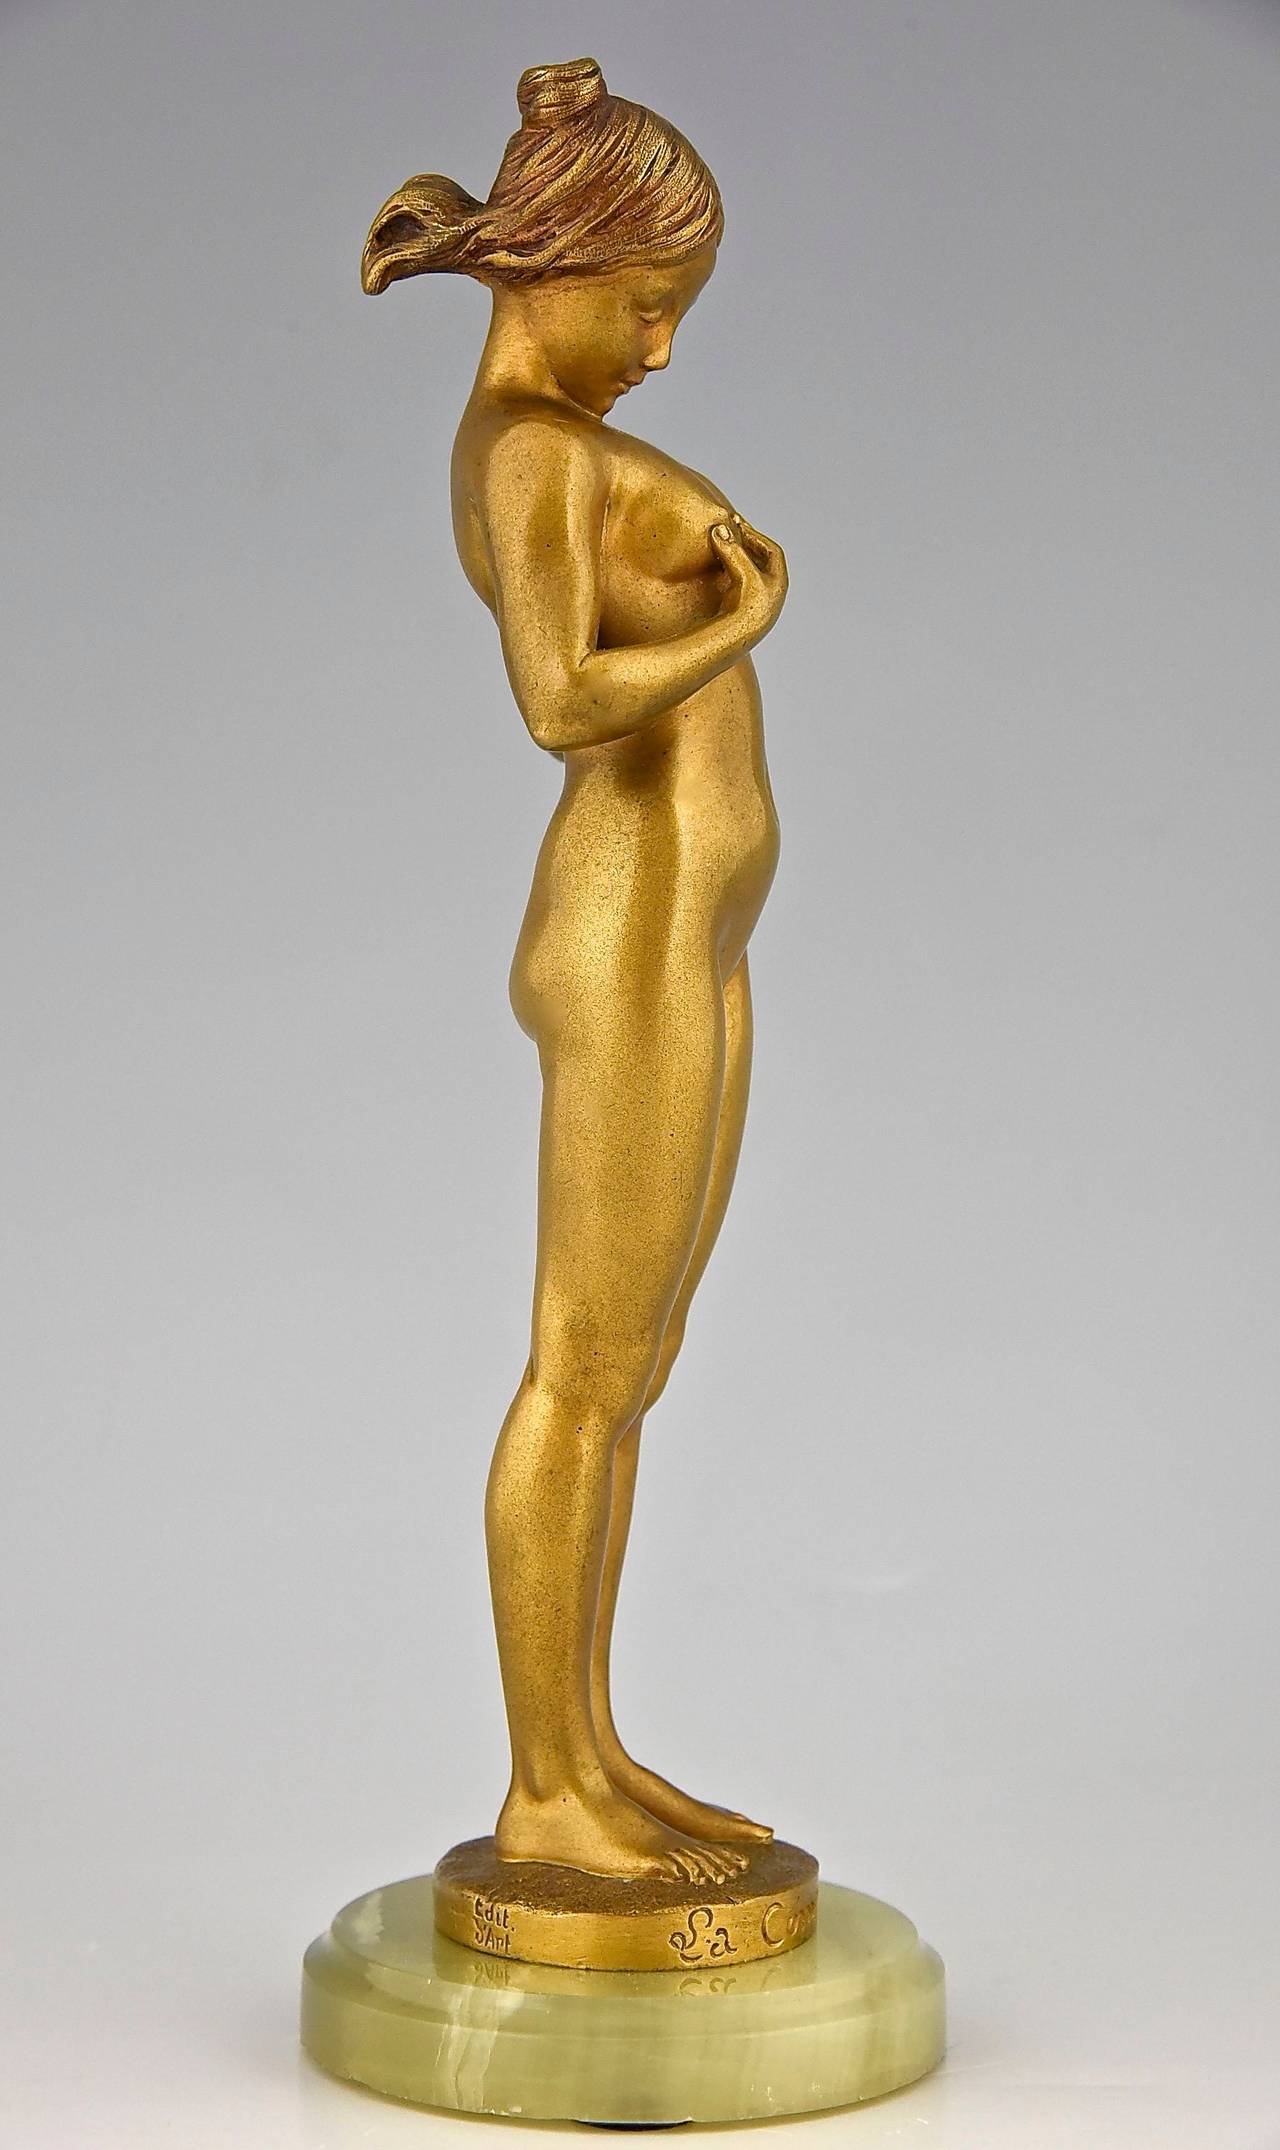 French Art Nouveau Gilt Bronze Sculpture of a Young Girl Nude by Bofill, France, 1905